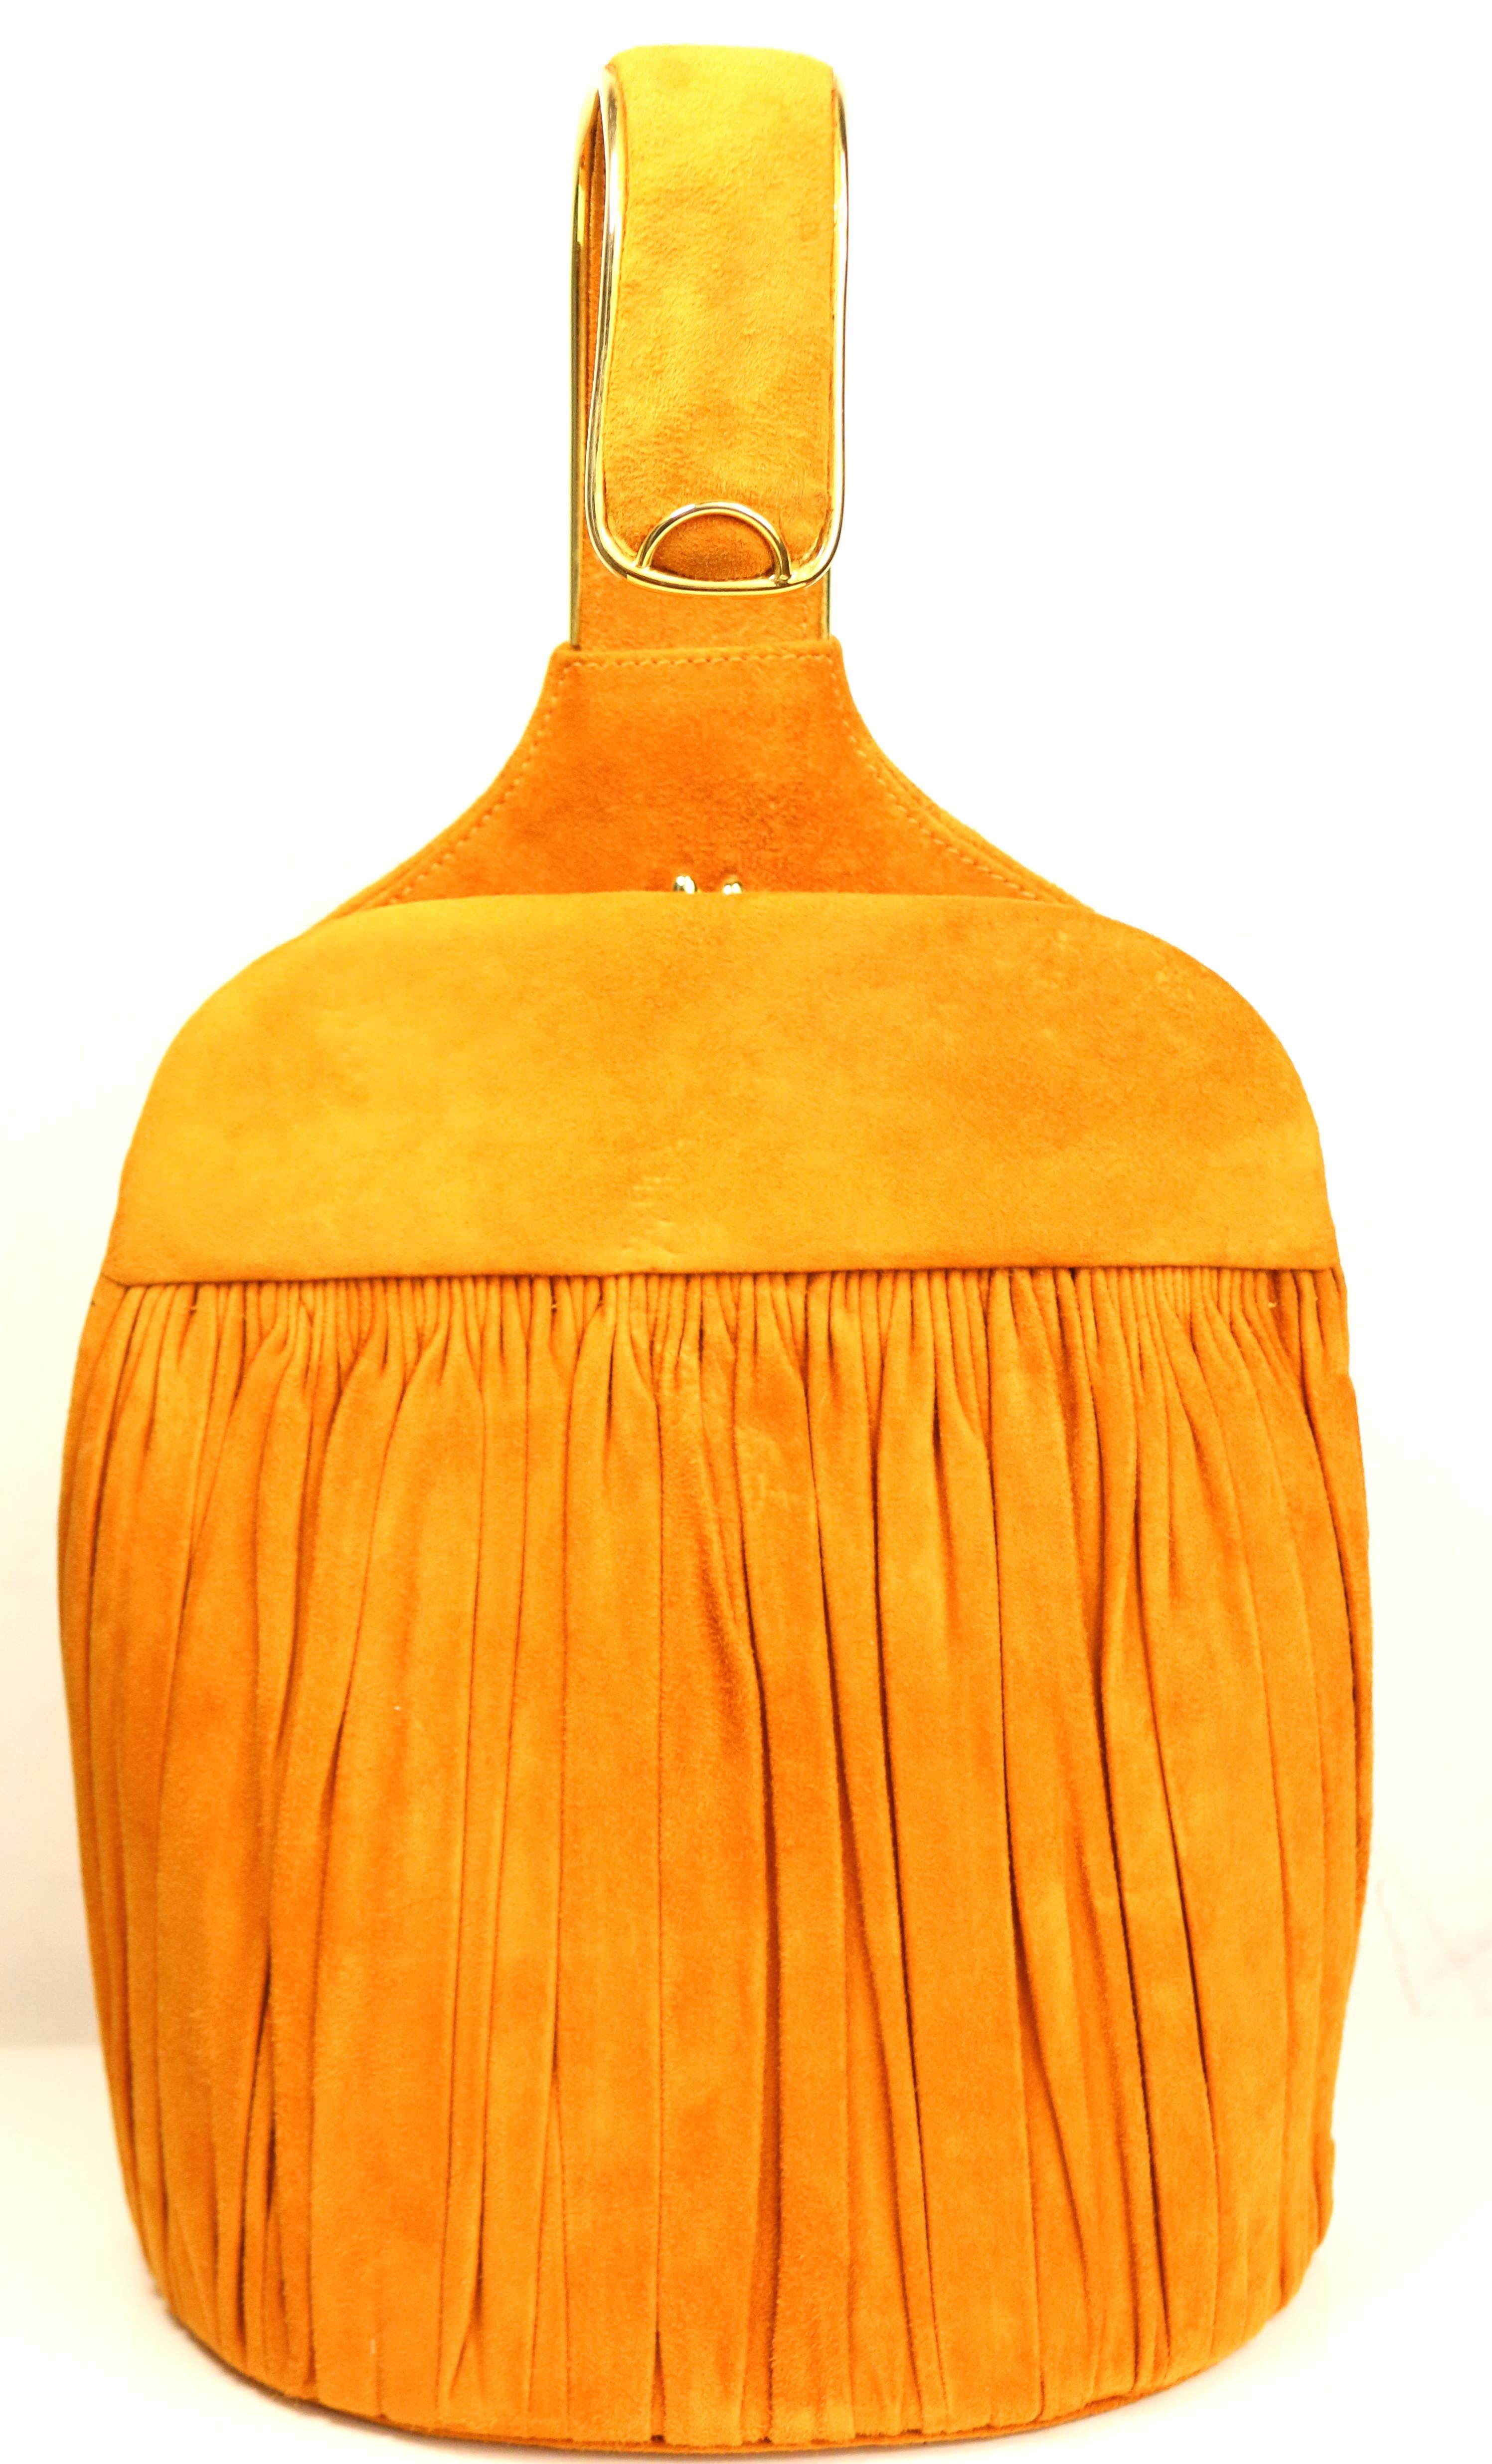 - Vintage 80s Andrea Pfister orange yellow suede handbag. 

- Featuring a gold toned kiss lock closure, open up to gold leather interior with two slip pockets. 

- Gold toned hardware piping suede crook handle. 

- Pleated front. 

- A very